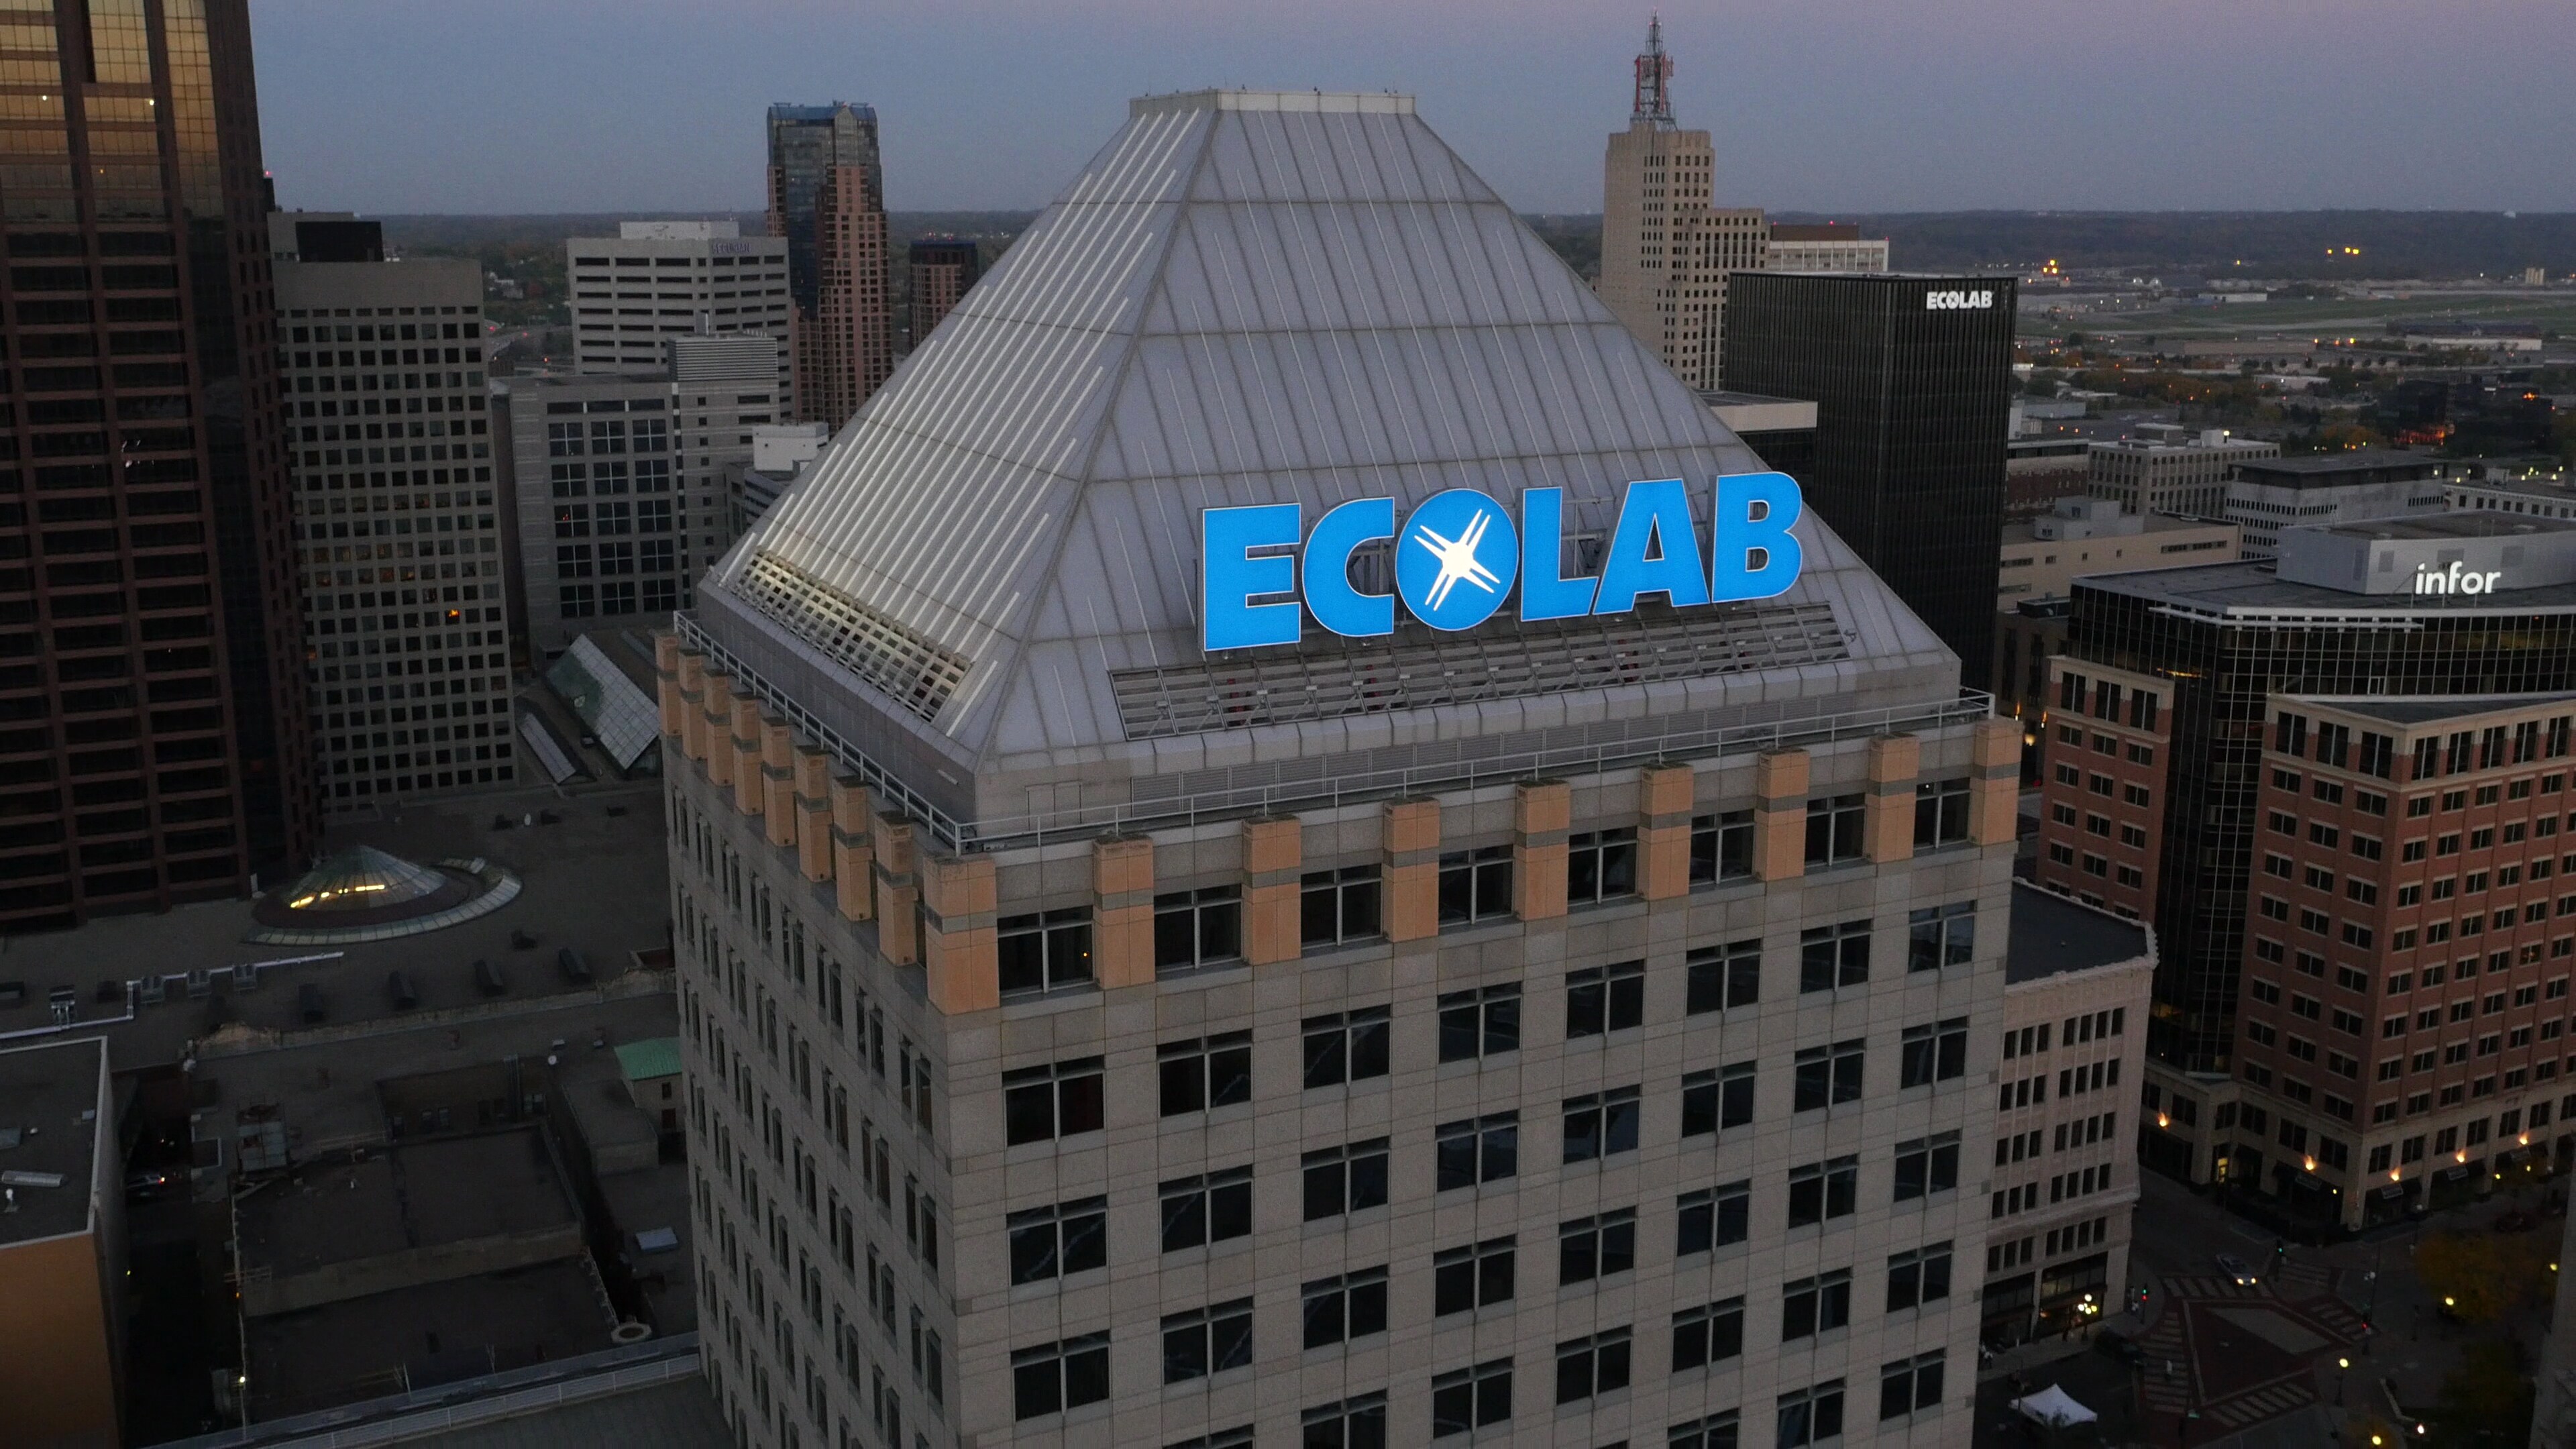 Ecolab Global Headquarters at night